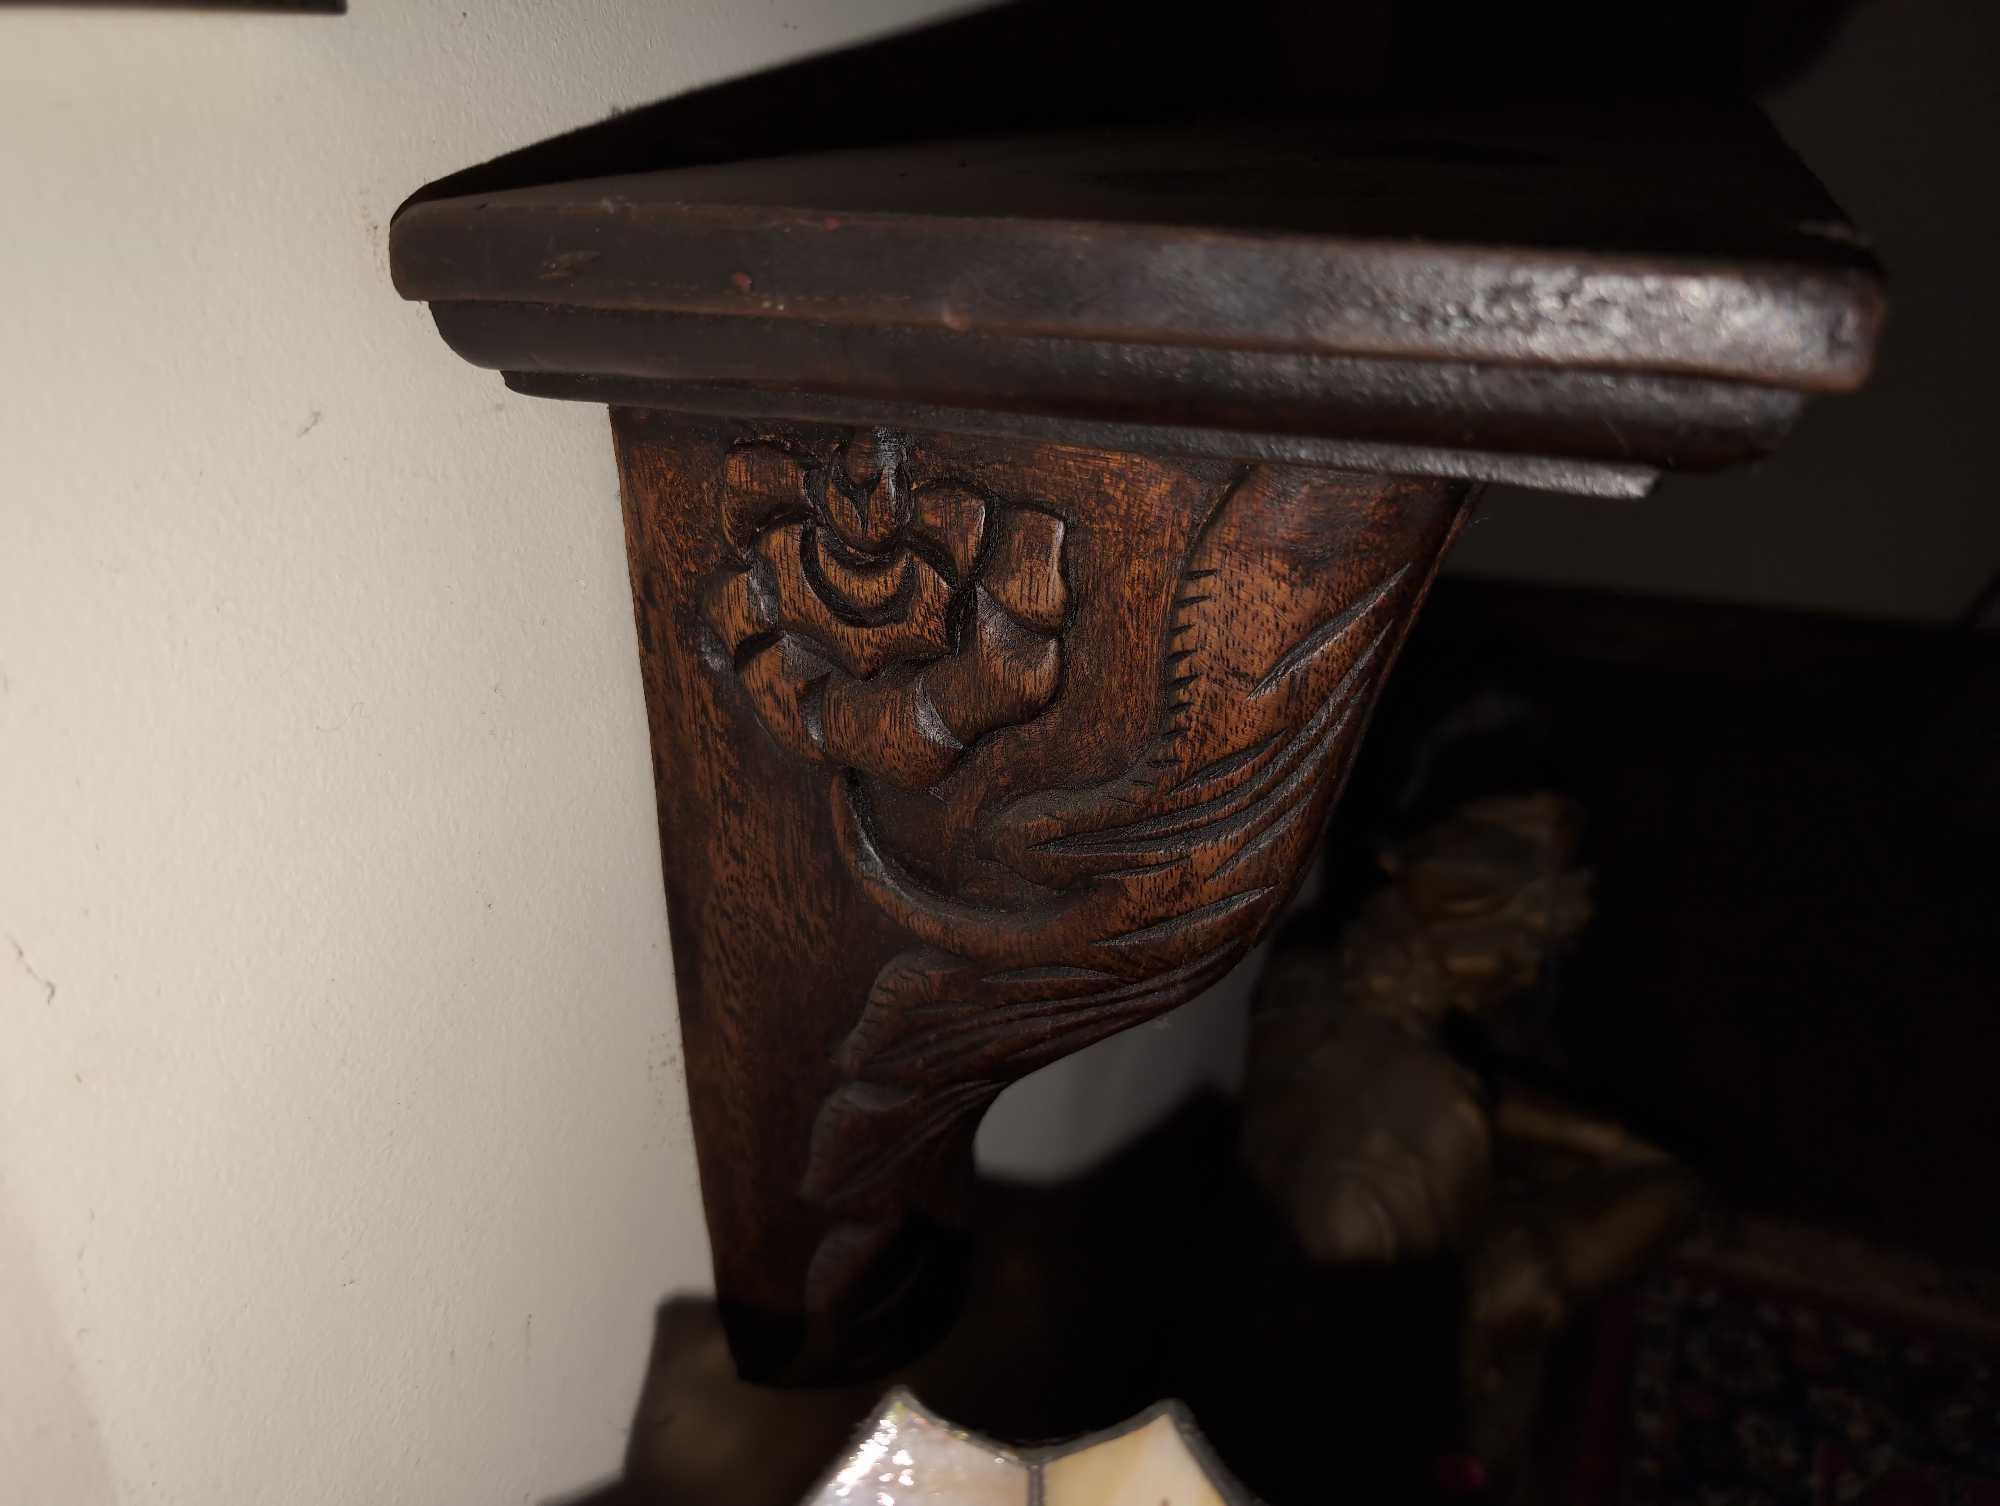 (FOYER) ANTIQUE HIGHLY CARVED WOOD WALL HANGING SHELF WITH FLORAL AND LINE DETAILING. IT MEASURES